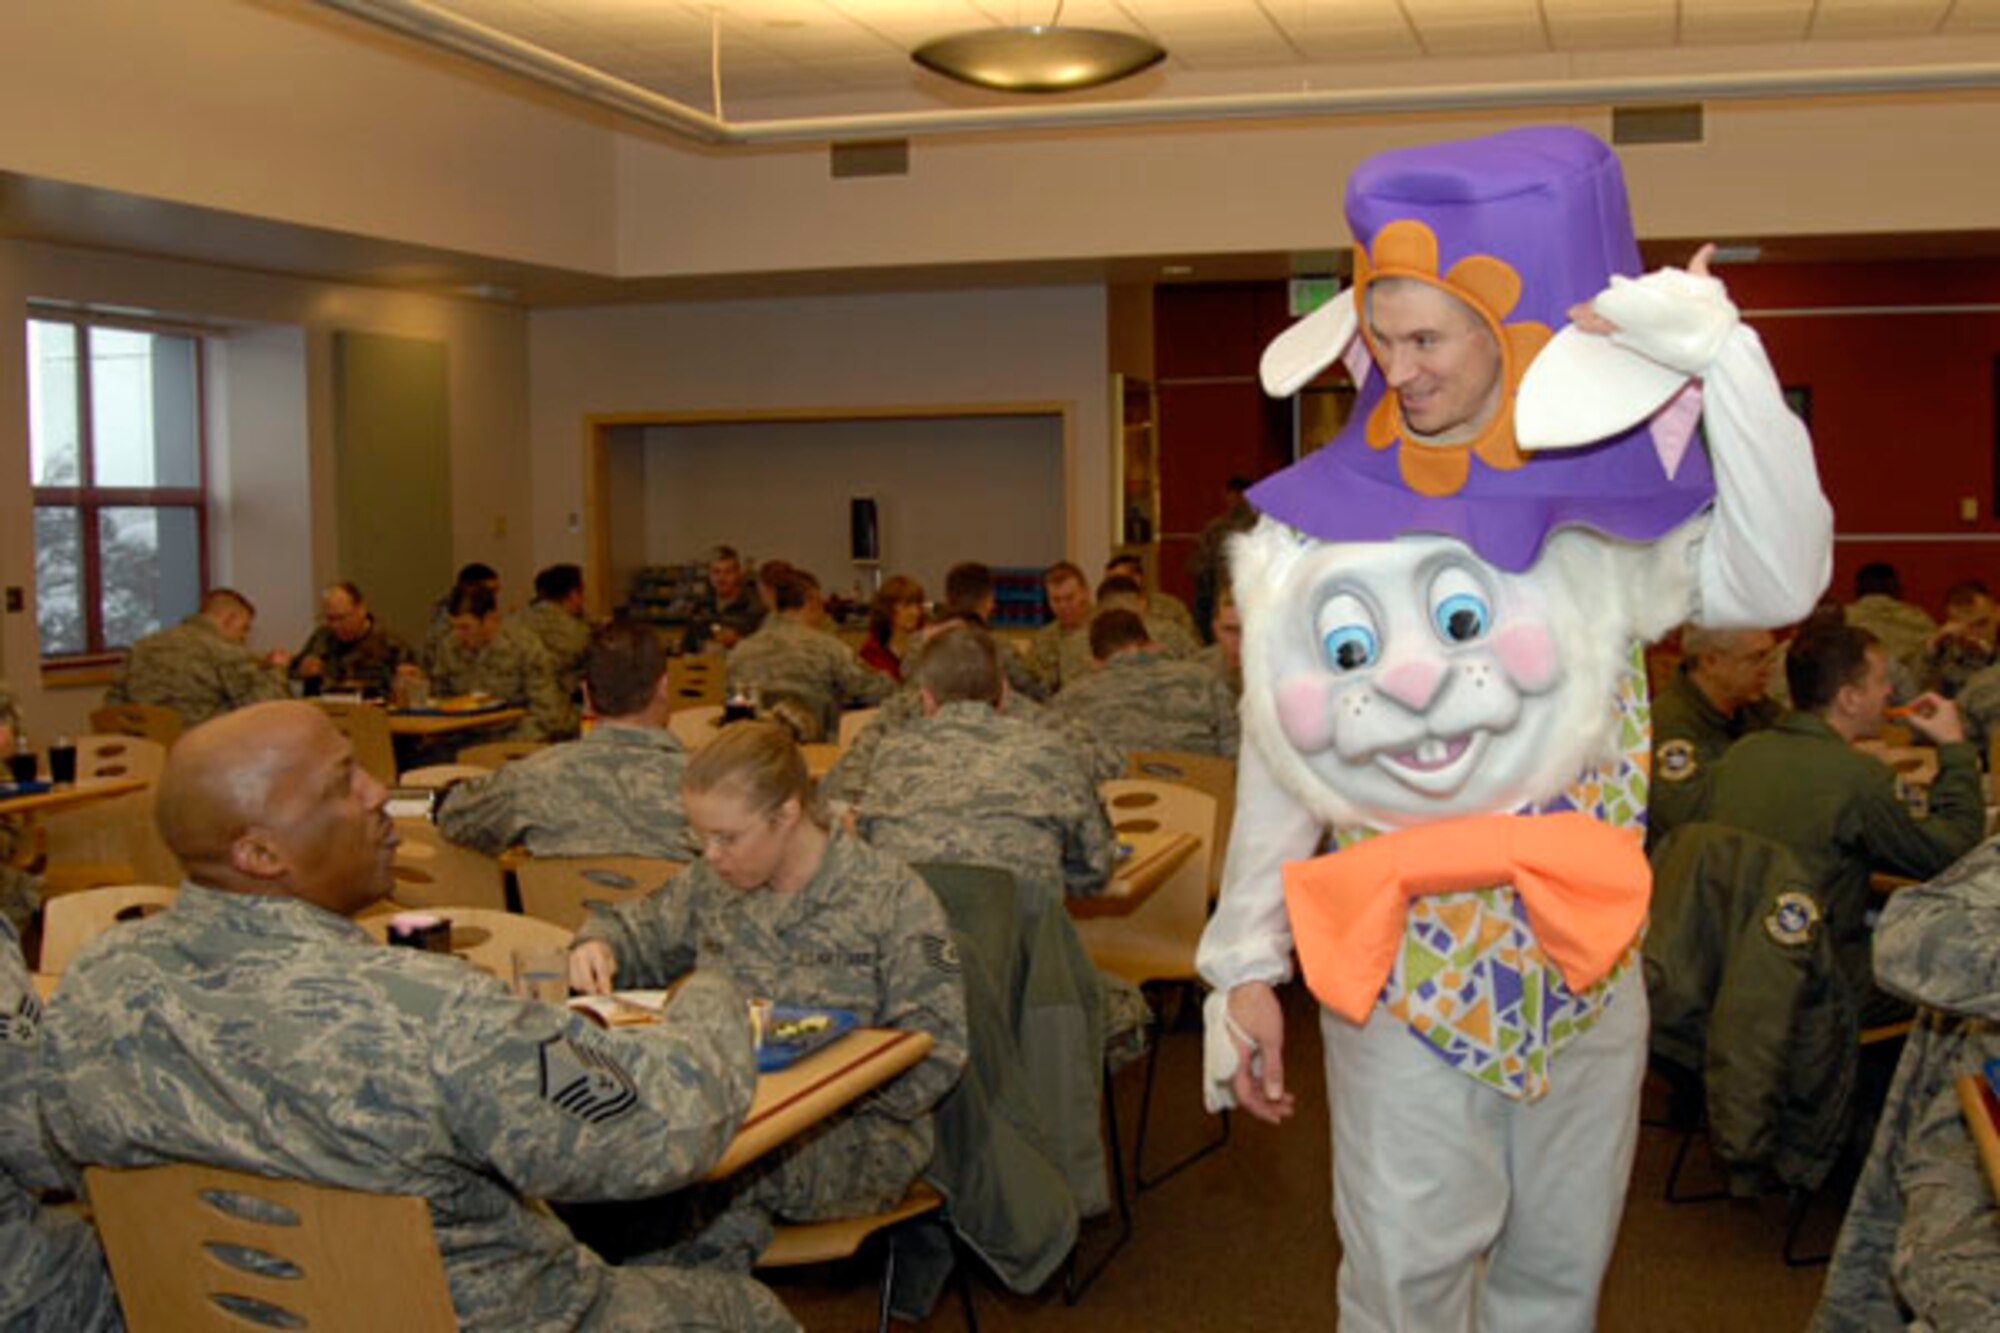 KULIS AIR NATIONAL GUARD BASE, Alaska -- Master Sgt. Ryan Voigt, the 176th Medical Group's first sergeant, wears a bunny suit in support of the "Bunny for the Day" fundraiser here Dec. 4, 2010.

The fundraiser was put on by Kulis' First Sergeant Council to raise money for holiday gift baskets. These baskets will be given to airmen and their families to help them through the holidays.

"Anything to help," Voigt said.

The fundraiser was one in a series of council-sponsored events, including a pizza luncheon, base coin sales and pocket donations.

The bunny suit fundraiser brought in about $1200, according to Master Sgt. Janet Lemmons, the 176th Civil Engineering Squadron's first sergeant and the First Sergeant Council president. 

The council raised more than $2500 for the baskets in total, Lemmons said. This will provide more than 30 airmen and families with holiday gift baskets, she said.

Lemmons said she appreciates Kulis' airmen for the donations and votes.
